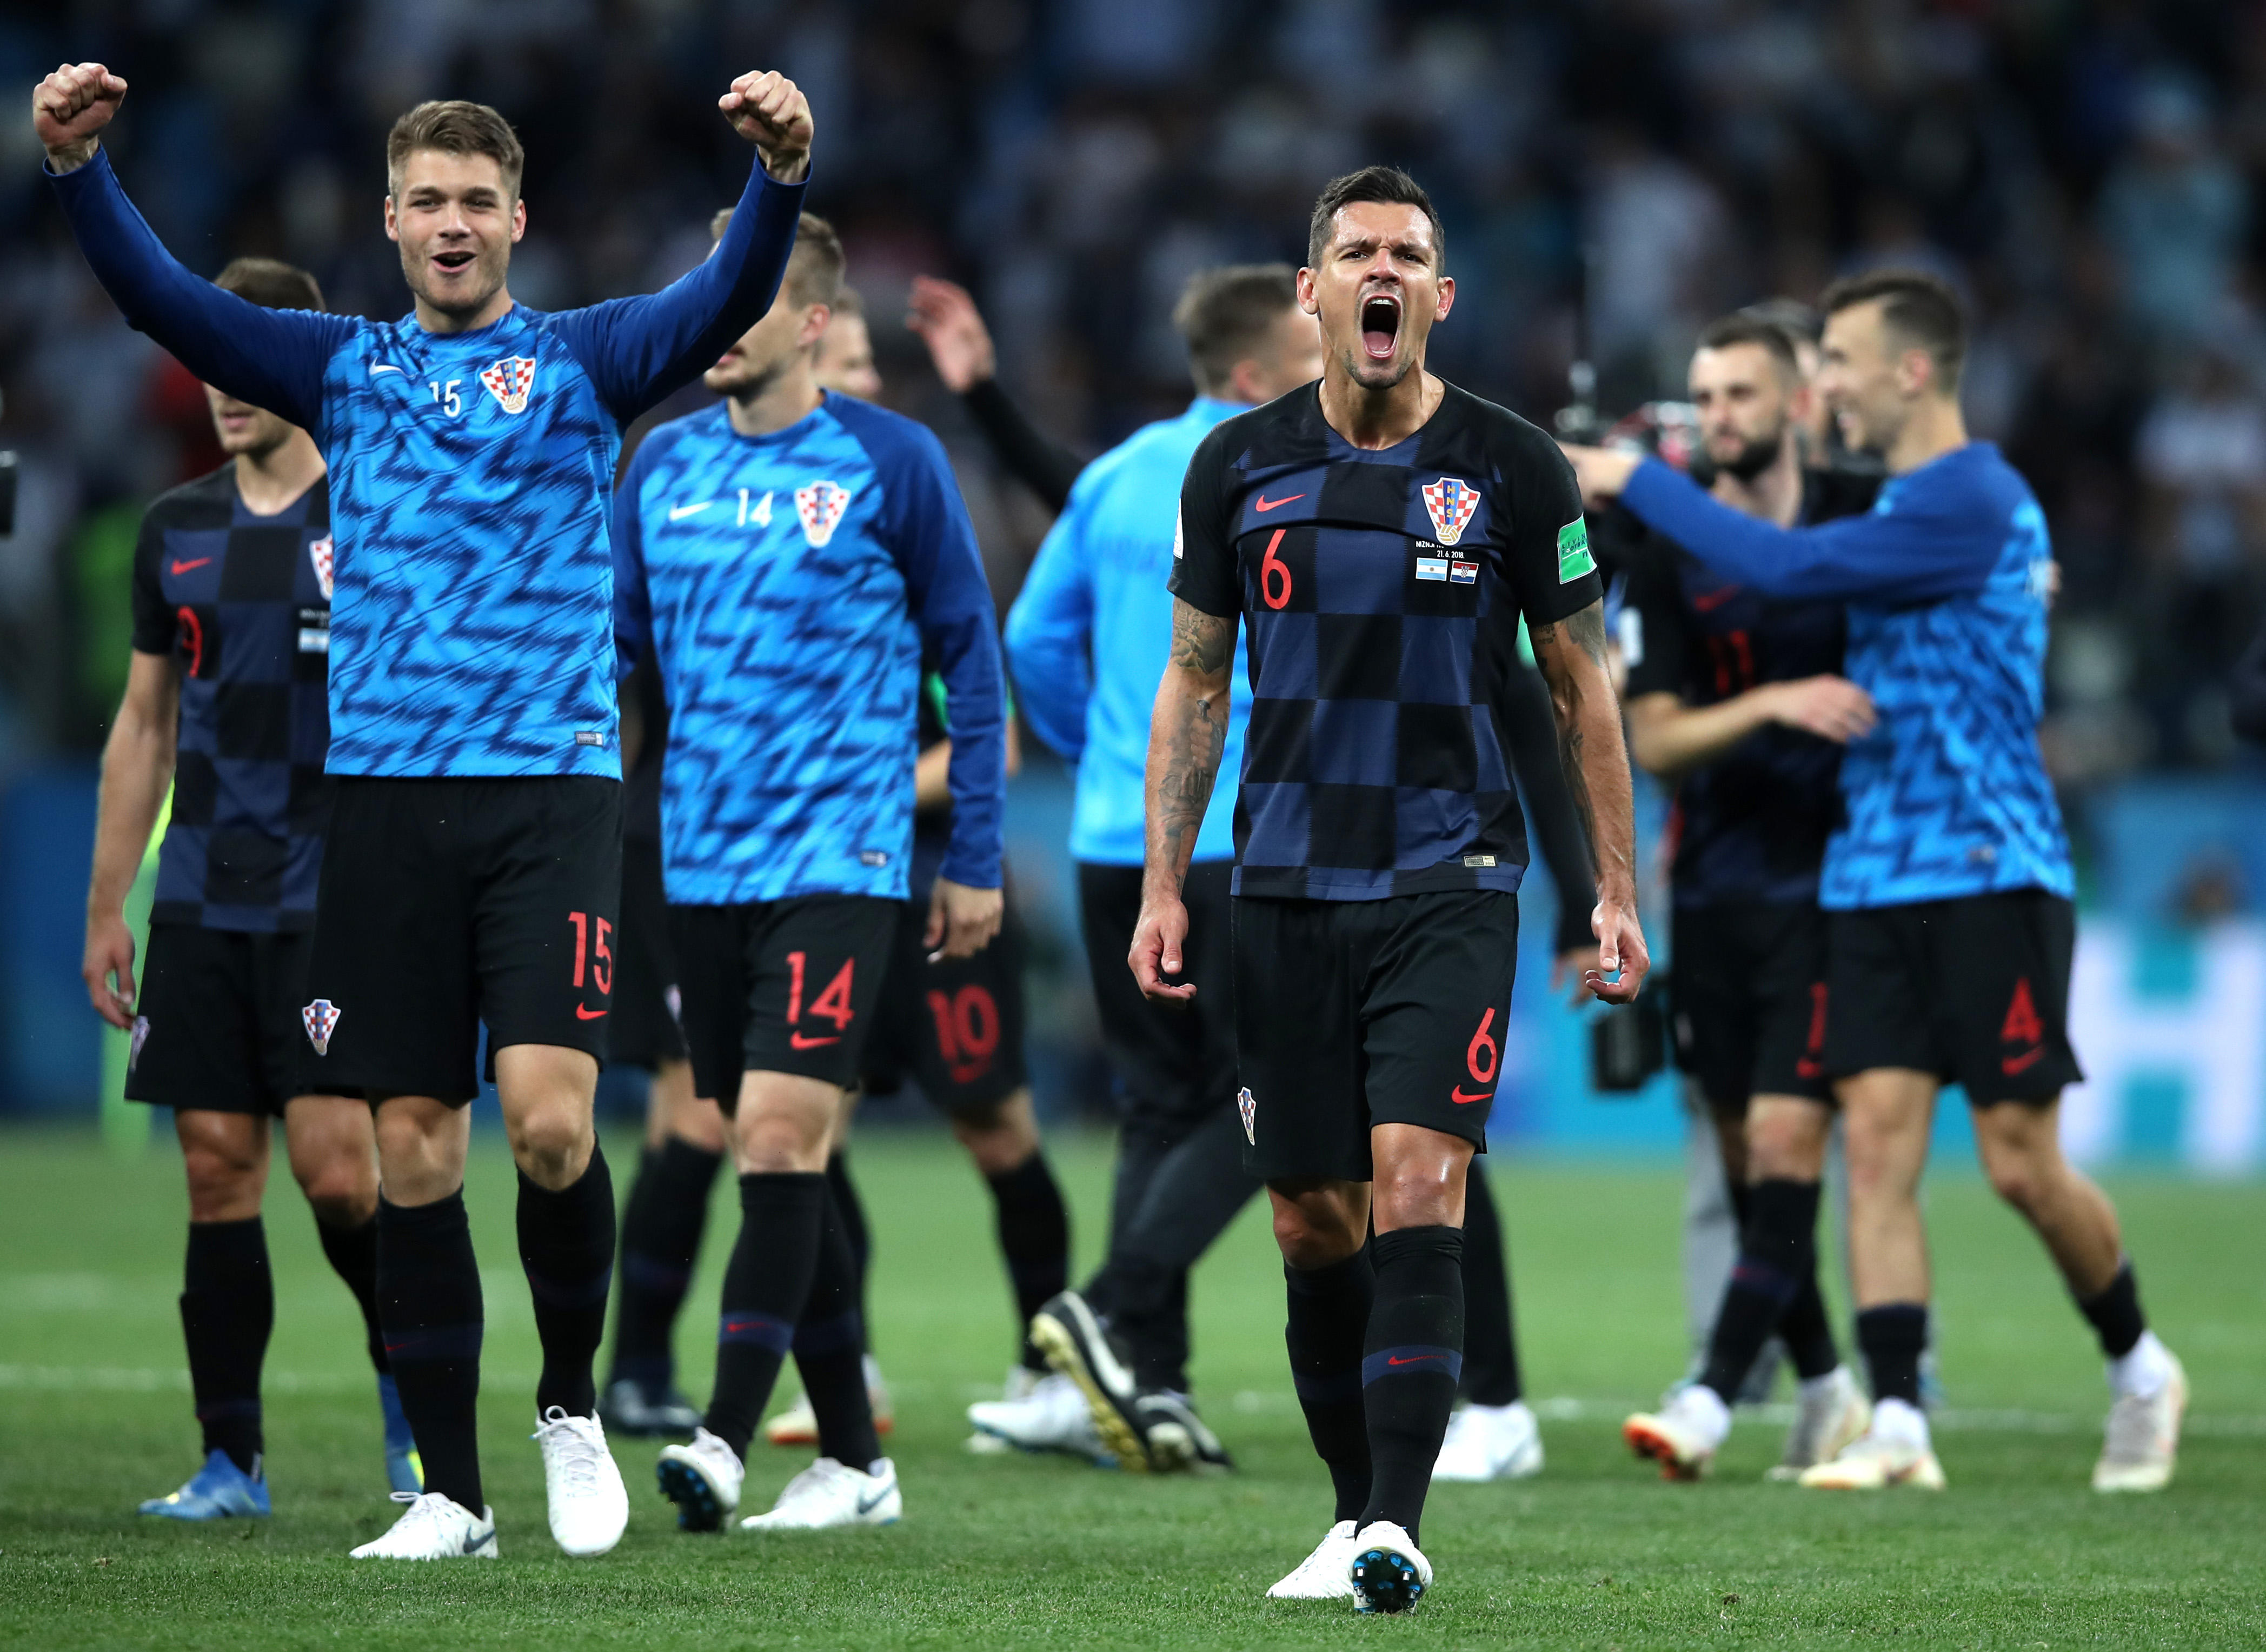 2018 World Cup Schedule, results today - Germany out of World Cup, Sweden wins Group F after defeating Mexico, Brazil wins Group E, Switzerland runner-up - live updates